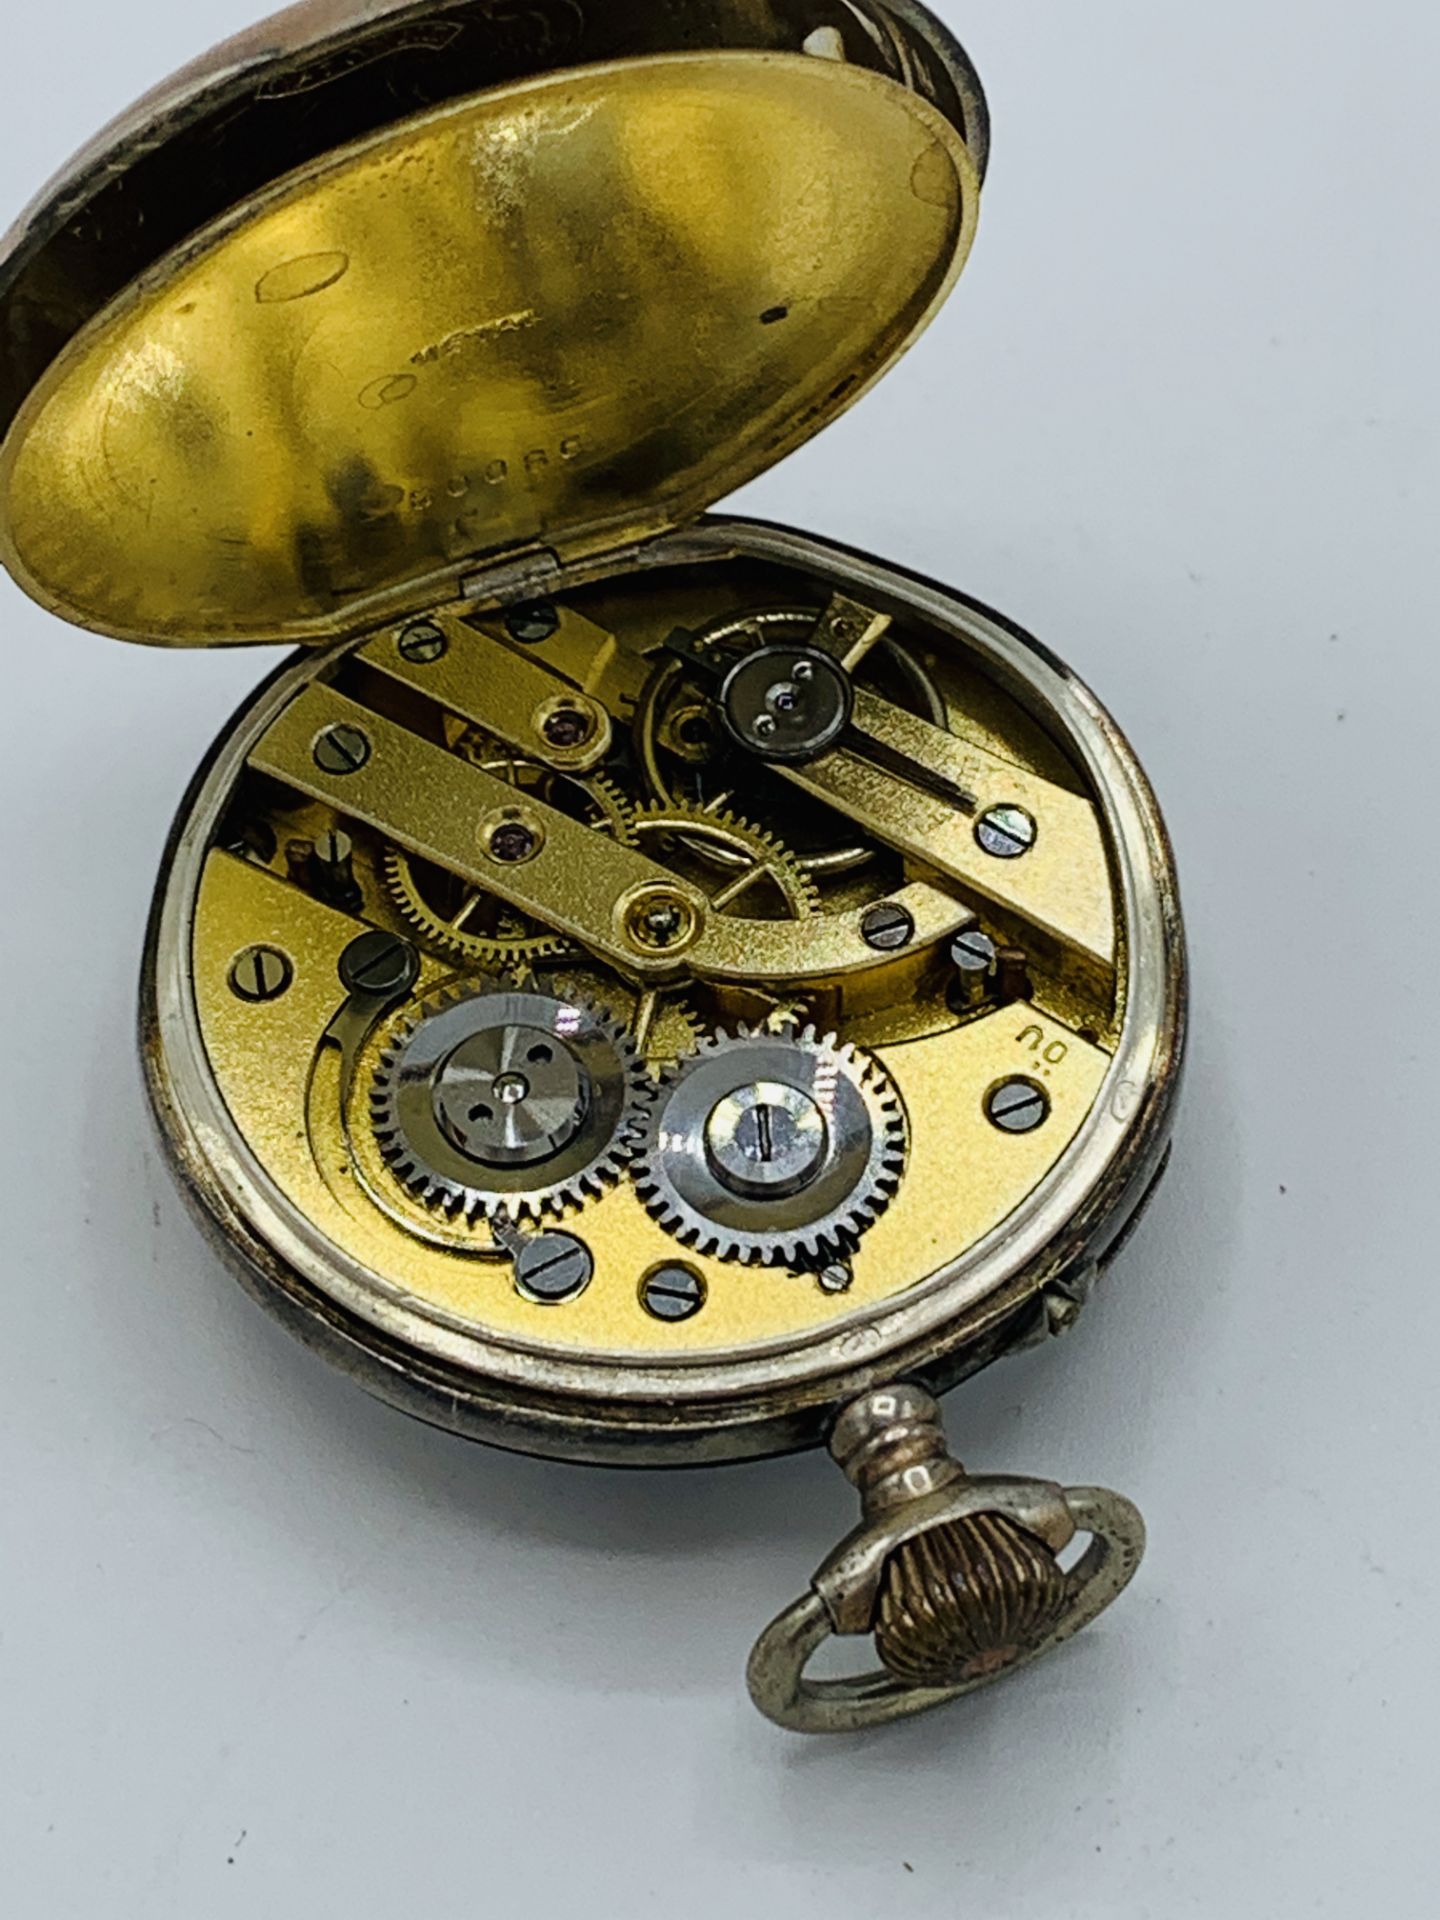 800 silver and gold plate case manual wind lady's pocket watch, in going order - Image 6 of 6